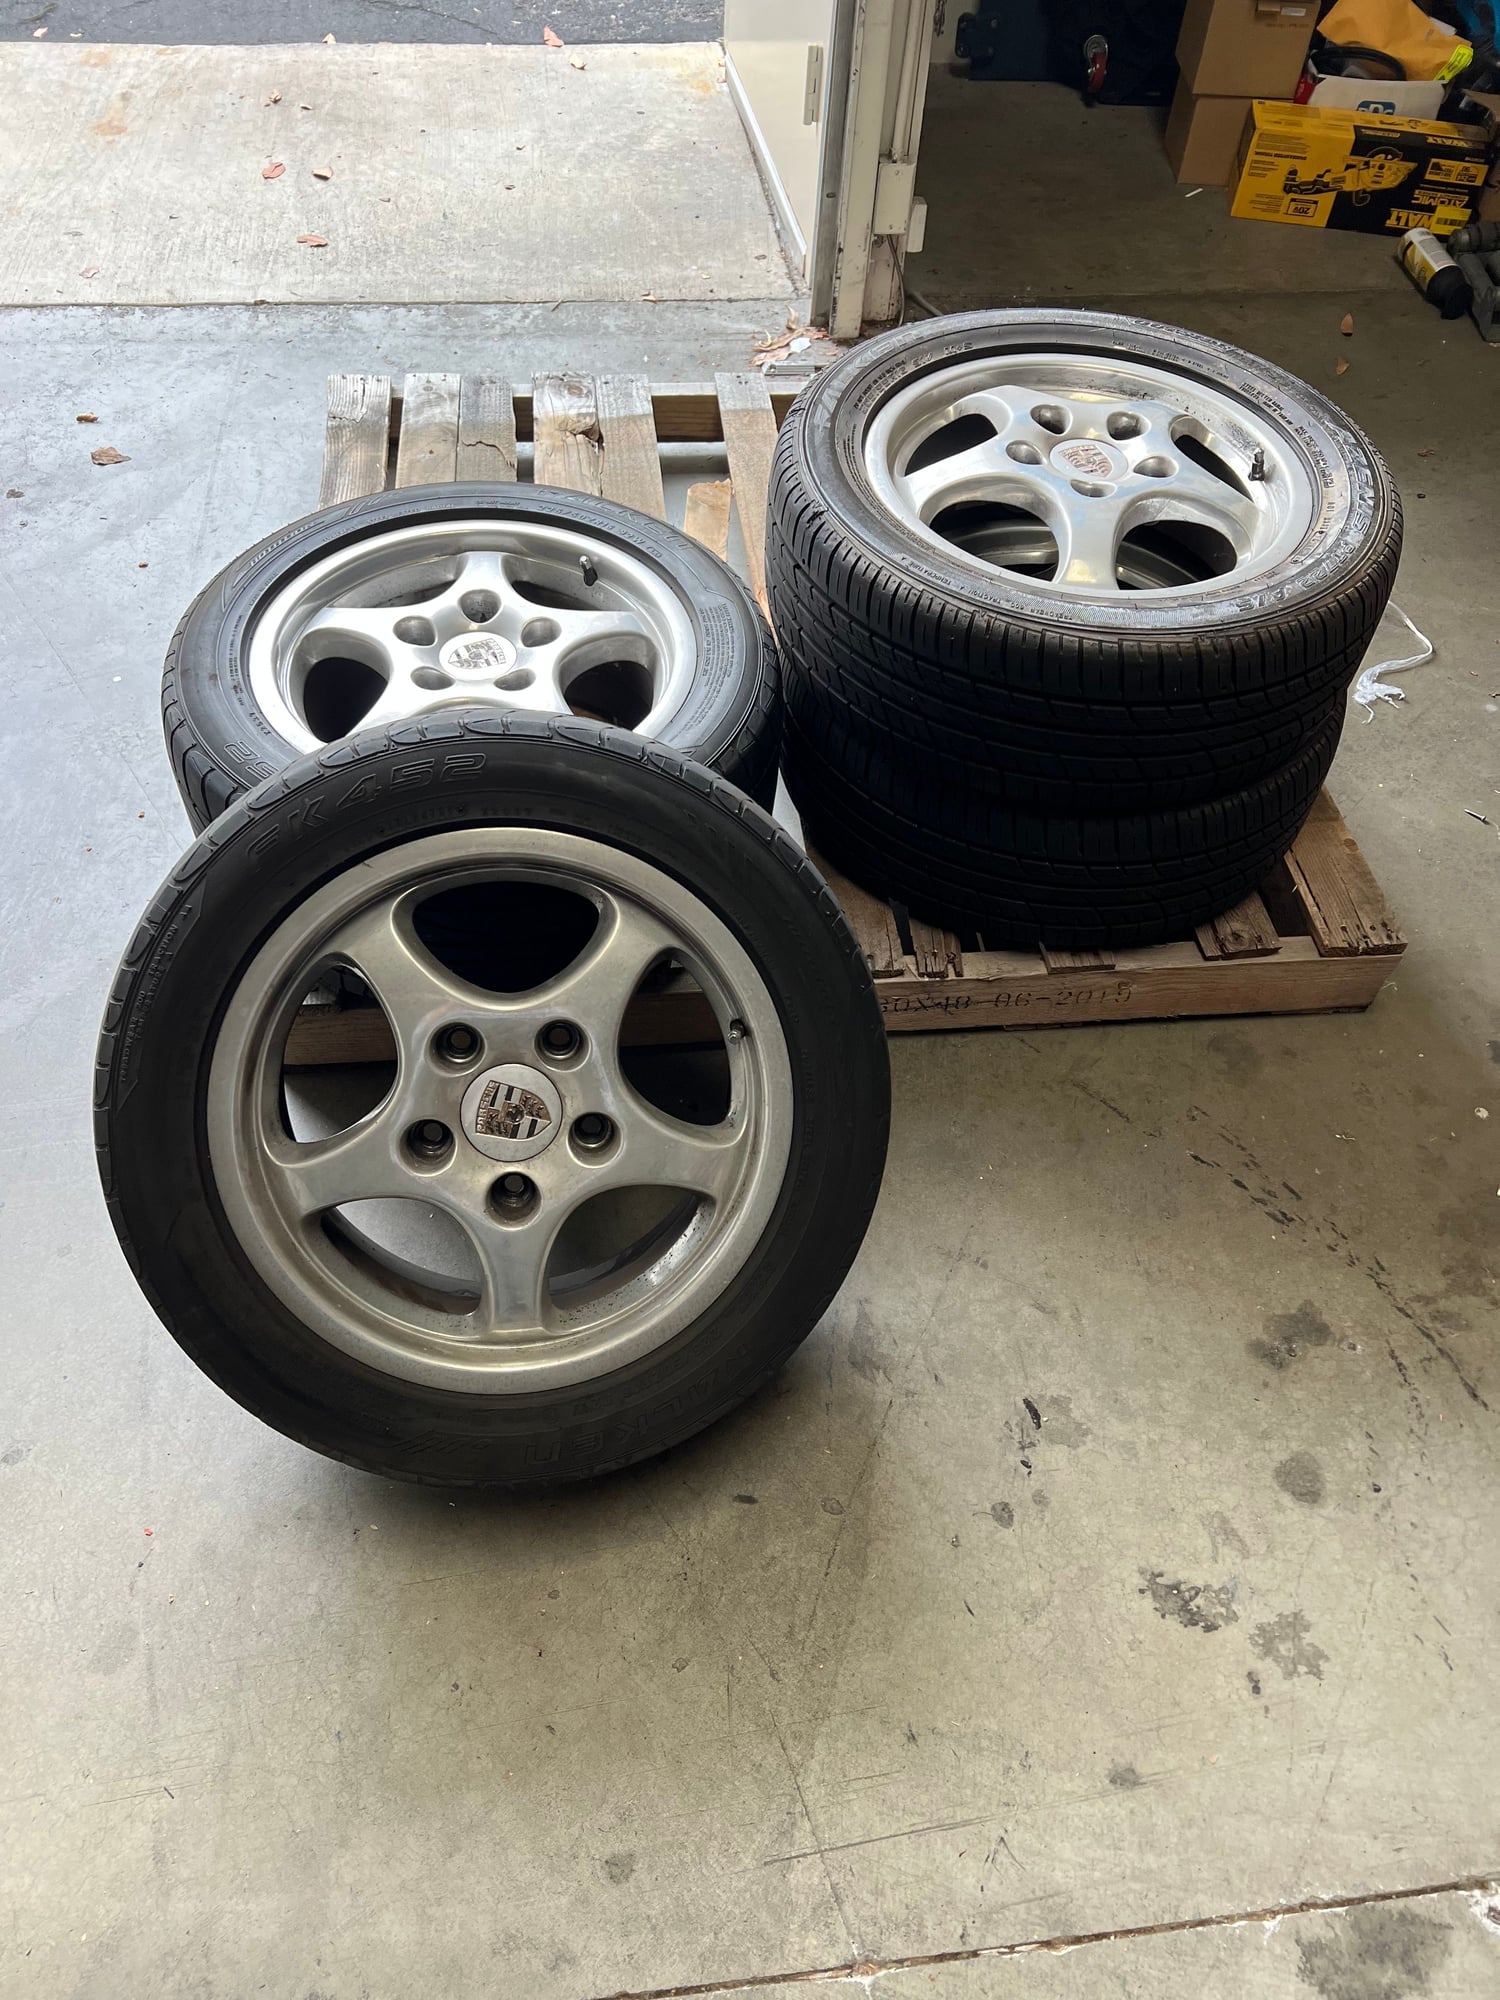 Wheels and Tires/Axles - FS: 964 16” Cup I Wheels - Used - Brea, CA 92821, United States